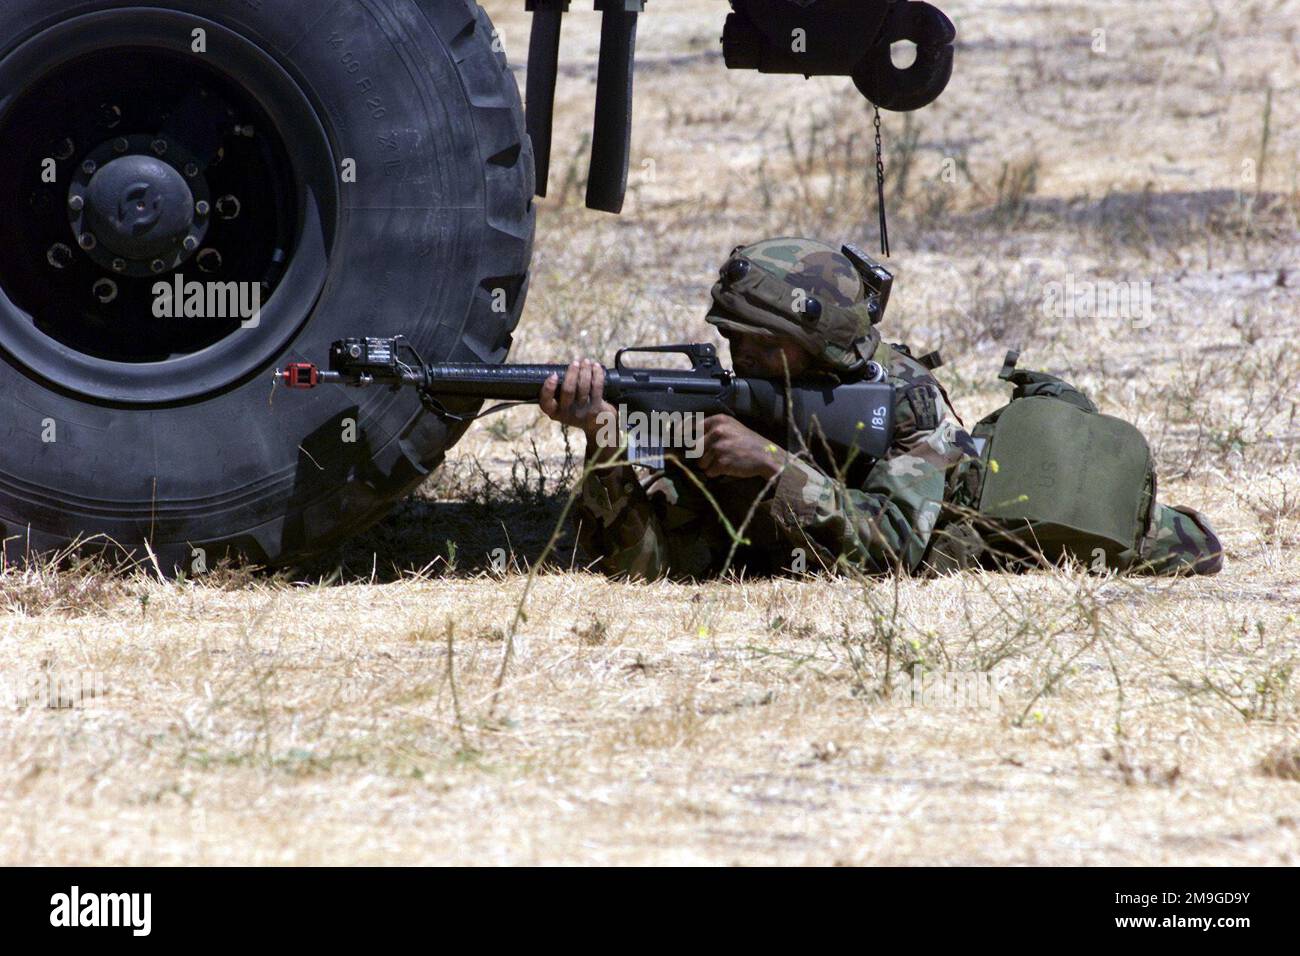 A soldier takes cover when oppostion forces storm the entry control point during Operation GOLDEN MEDIC 2001. Reserve forces from all over the nation are participating in Golden Medic, a multi-unit, medical, field training exercise held at Parks Reserve Forces Training Area, Dublin, California, in which the Army transports simulated casualties from the frontline through various staging areas to a main tent in order to train personnel in medical procedures and evacuation methods. Attached to the helmet, upper body and M-16A2 rifle is the Multiple Integrated Laser Engagement System (MILES) gear Stock Photo